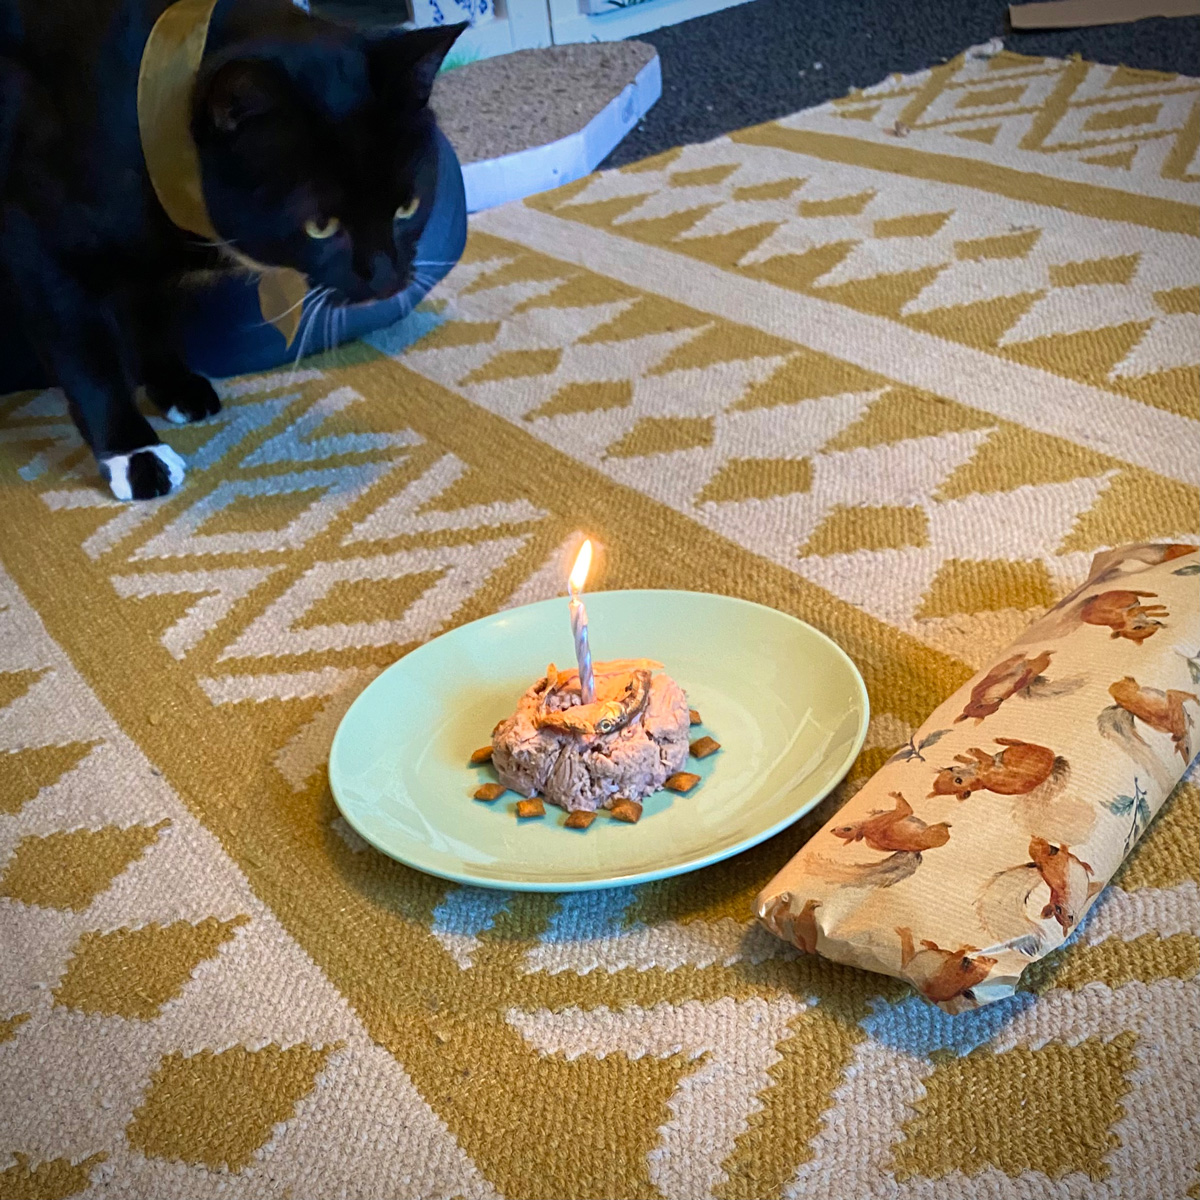 A cake made of tuna and whole small fish, surrounded by a ring of dreamies, and topped with a candle. Tootsie is being held back from eating the cake while the candle is lit.